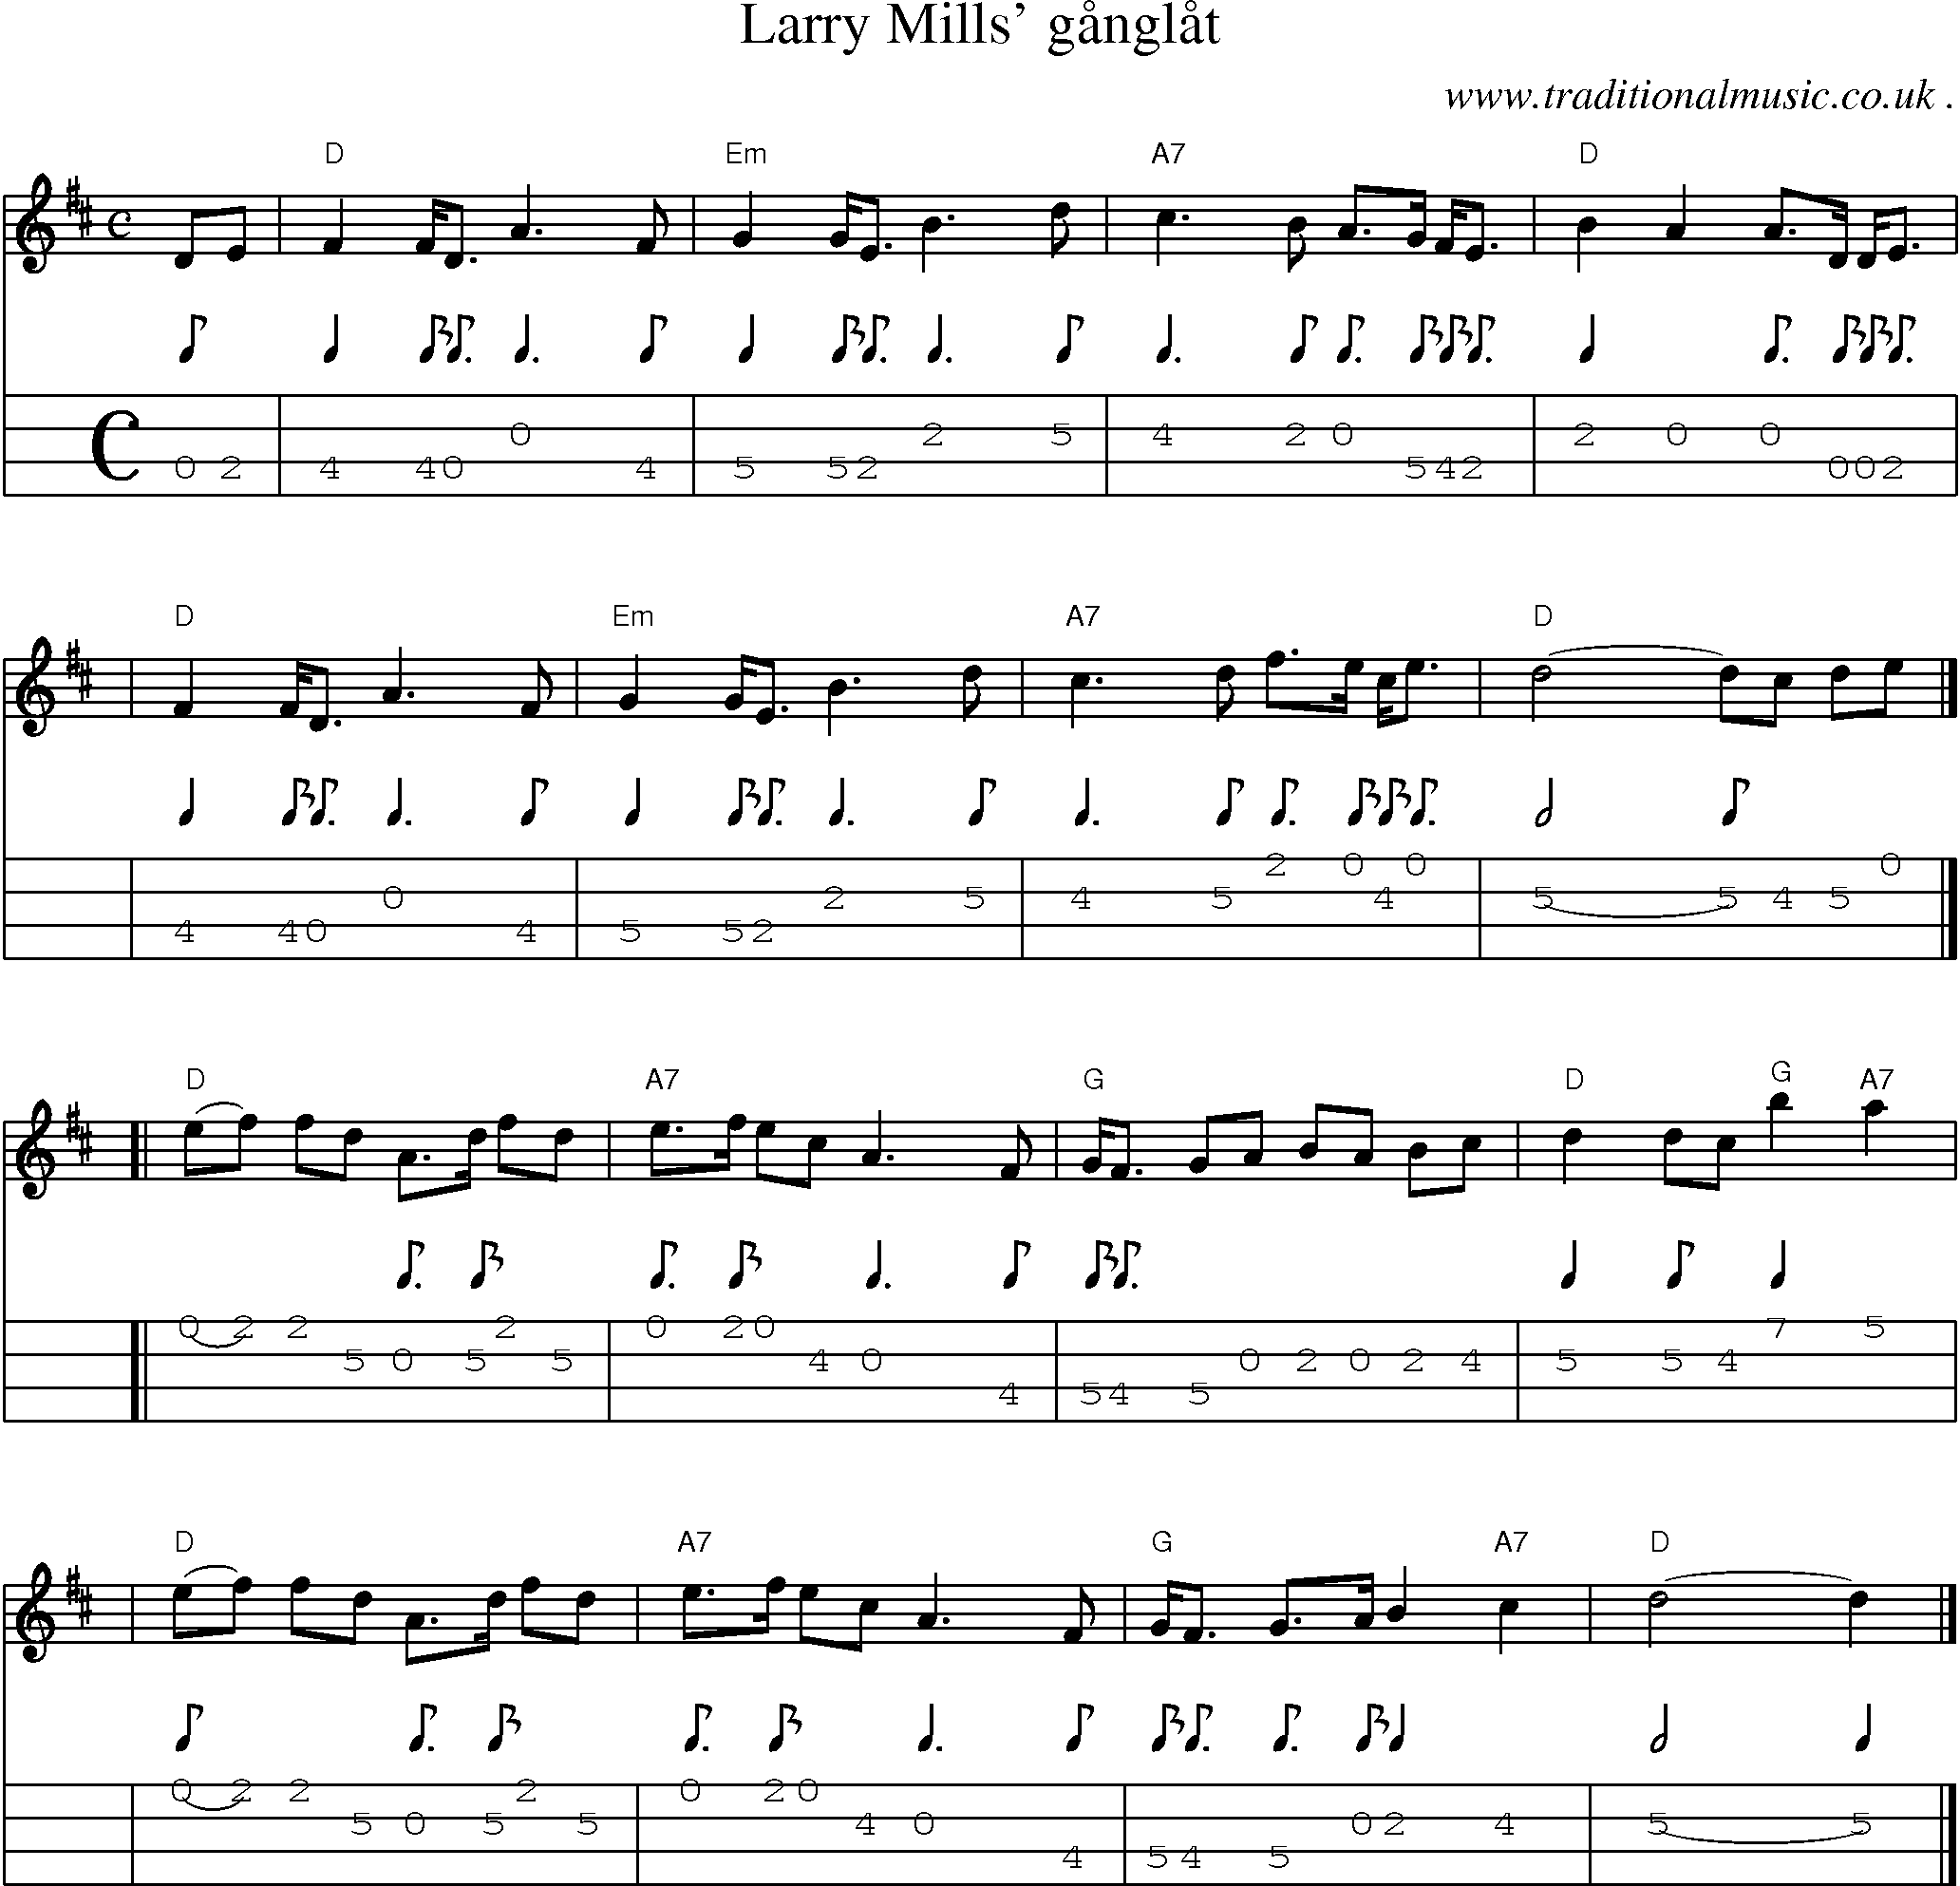 Sheet-music  score, Chords and Mandolin Tabs for Larry Mills Gaanglaat